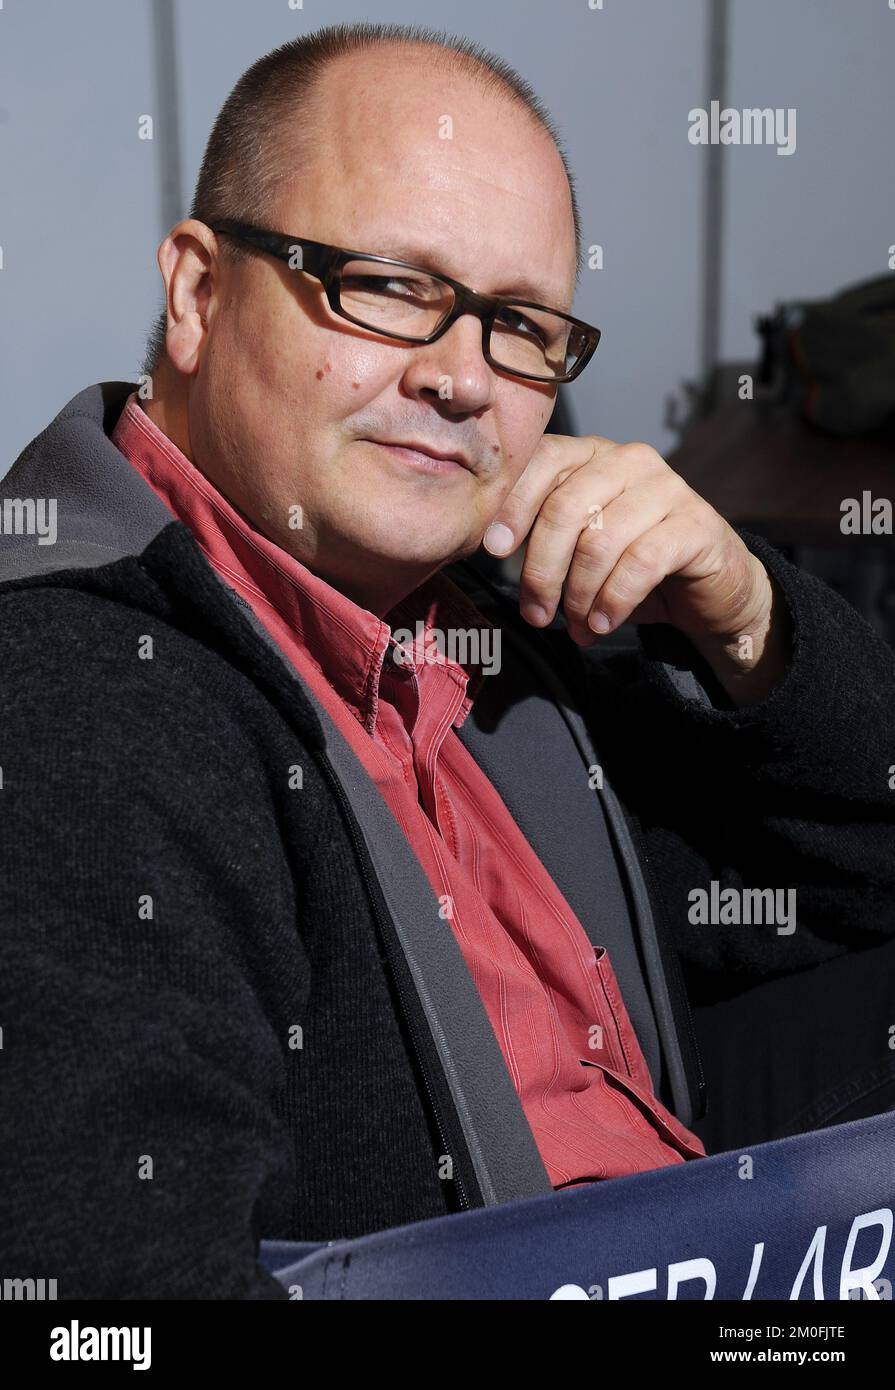 Danish film director Birger Larsen poses for photographs after attending the premiere of his film 'Super Brother' in Denmark. Stock Photo